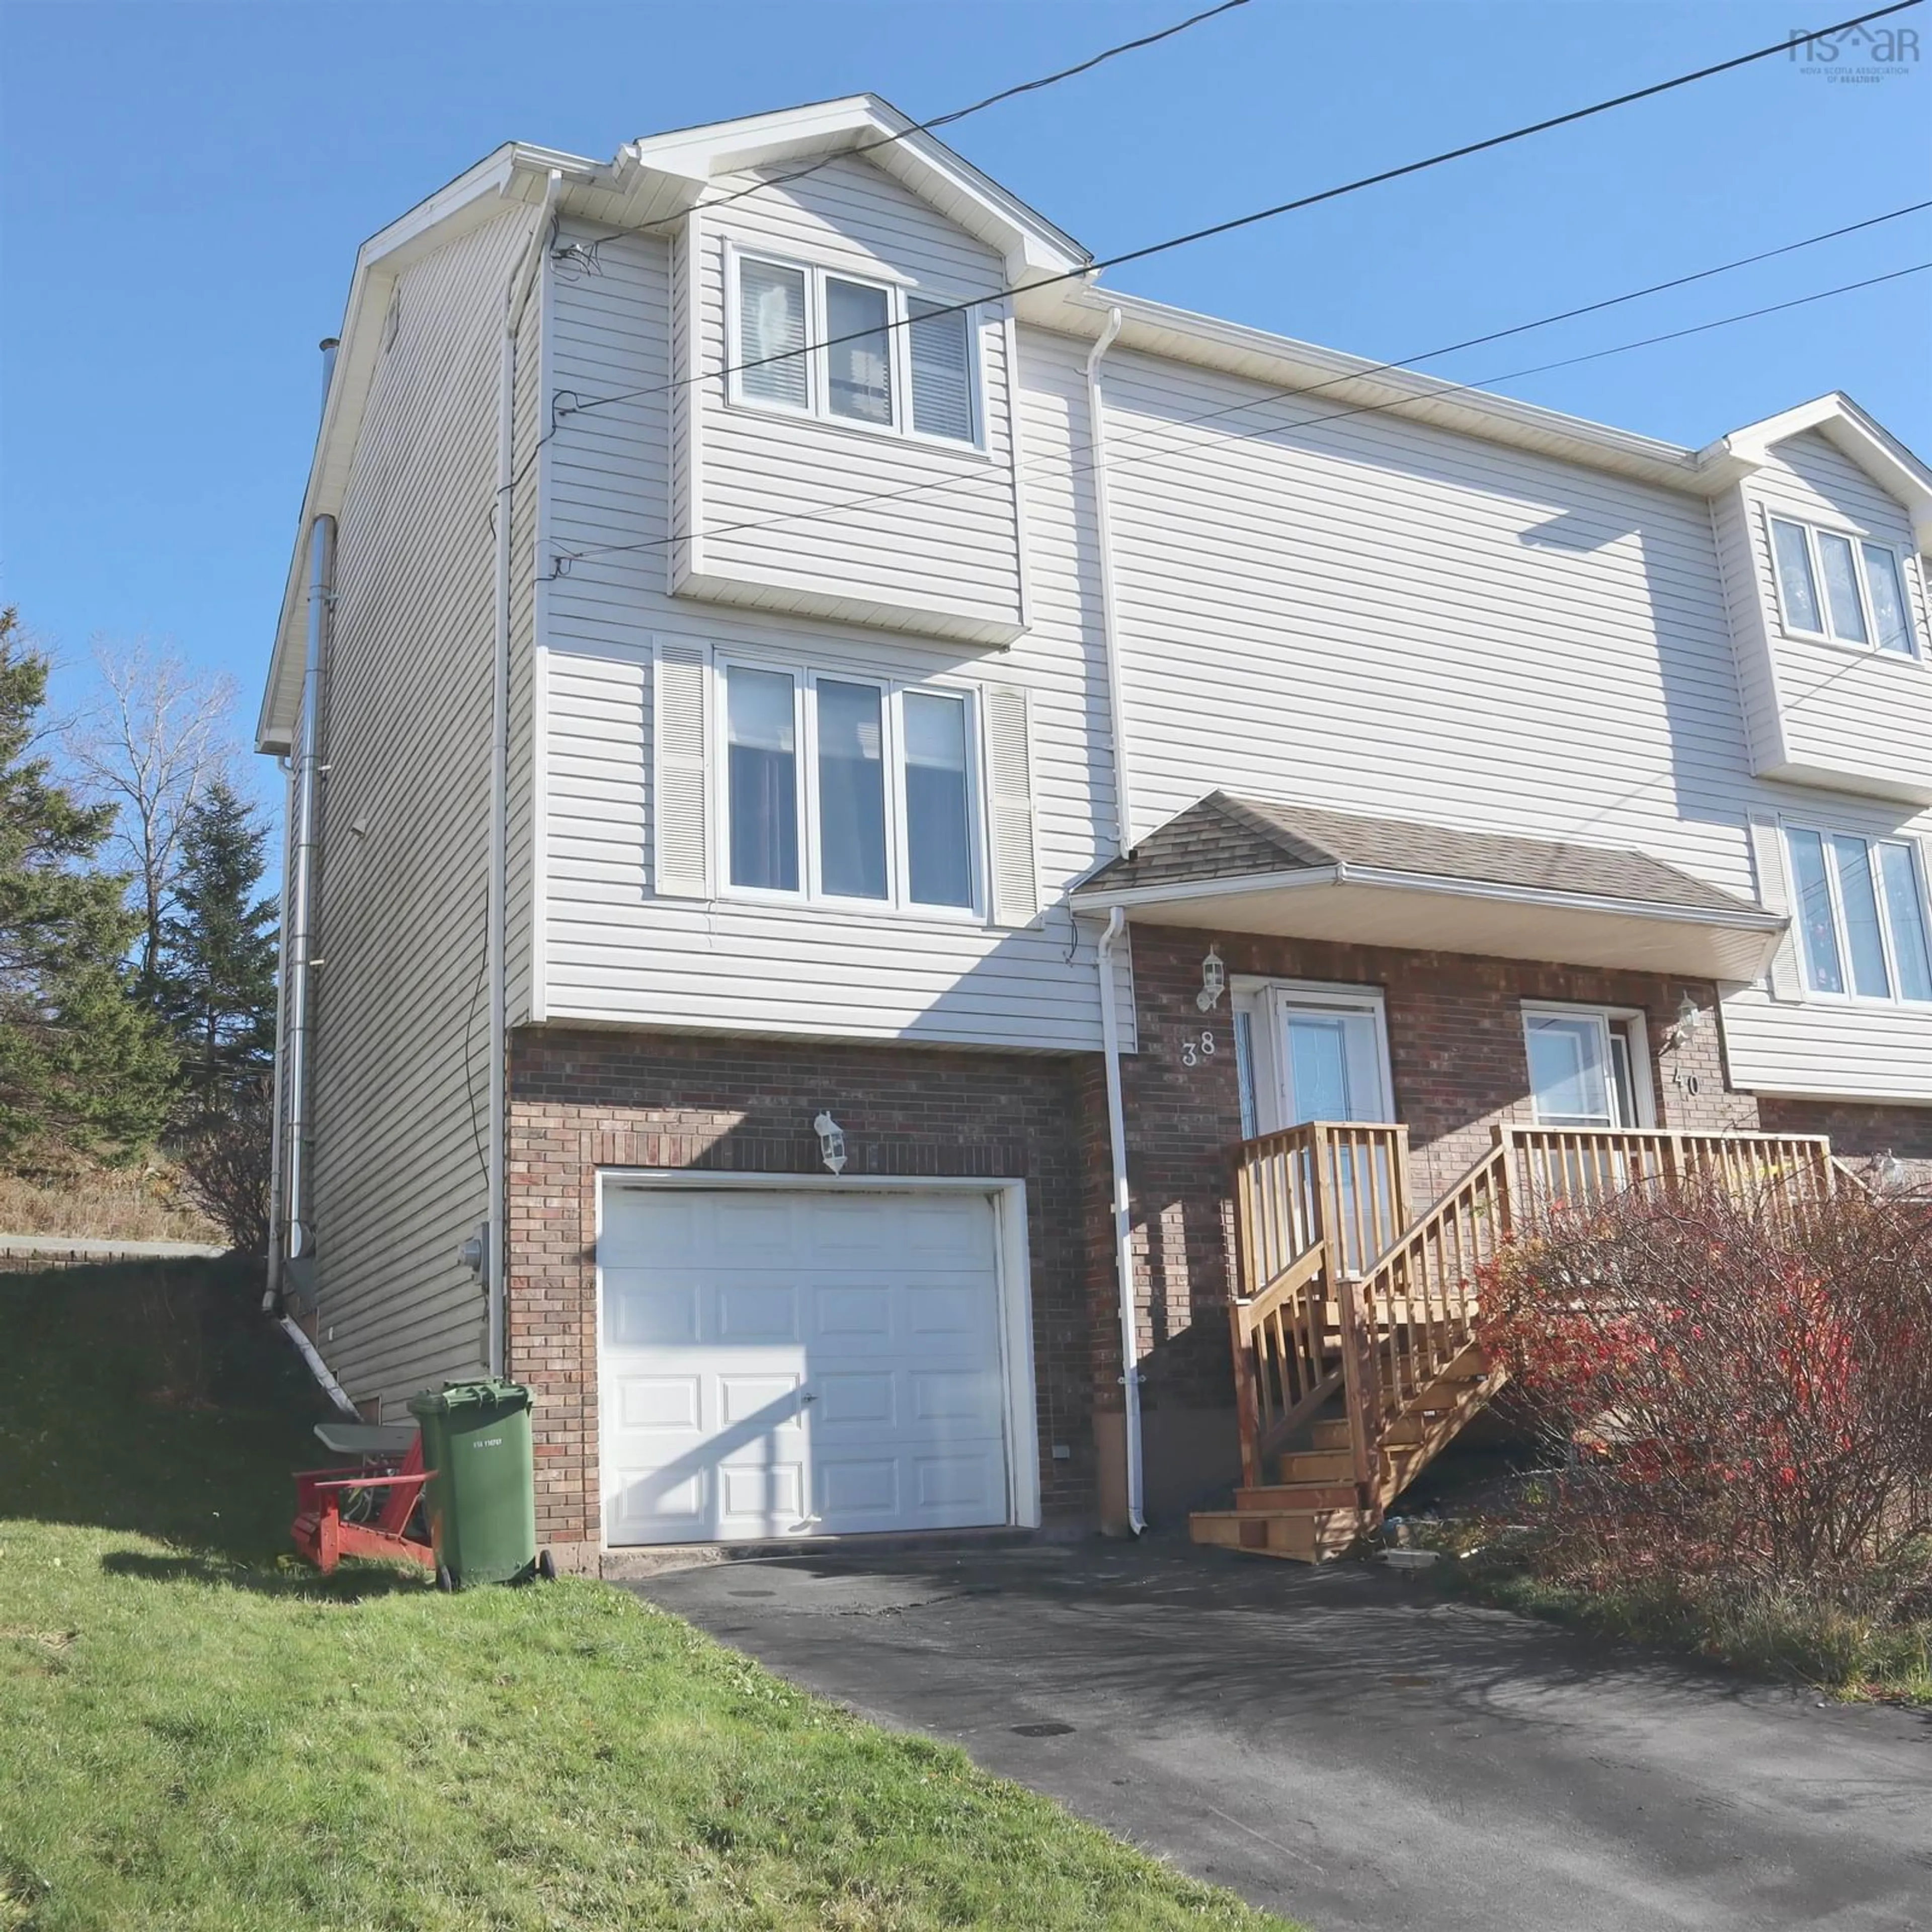 Home with unknown exterior material for 38 Albany Terr, Cole Harbour Nova Scotia B2W 6E8